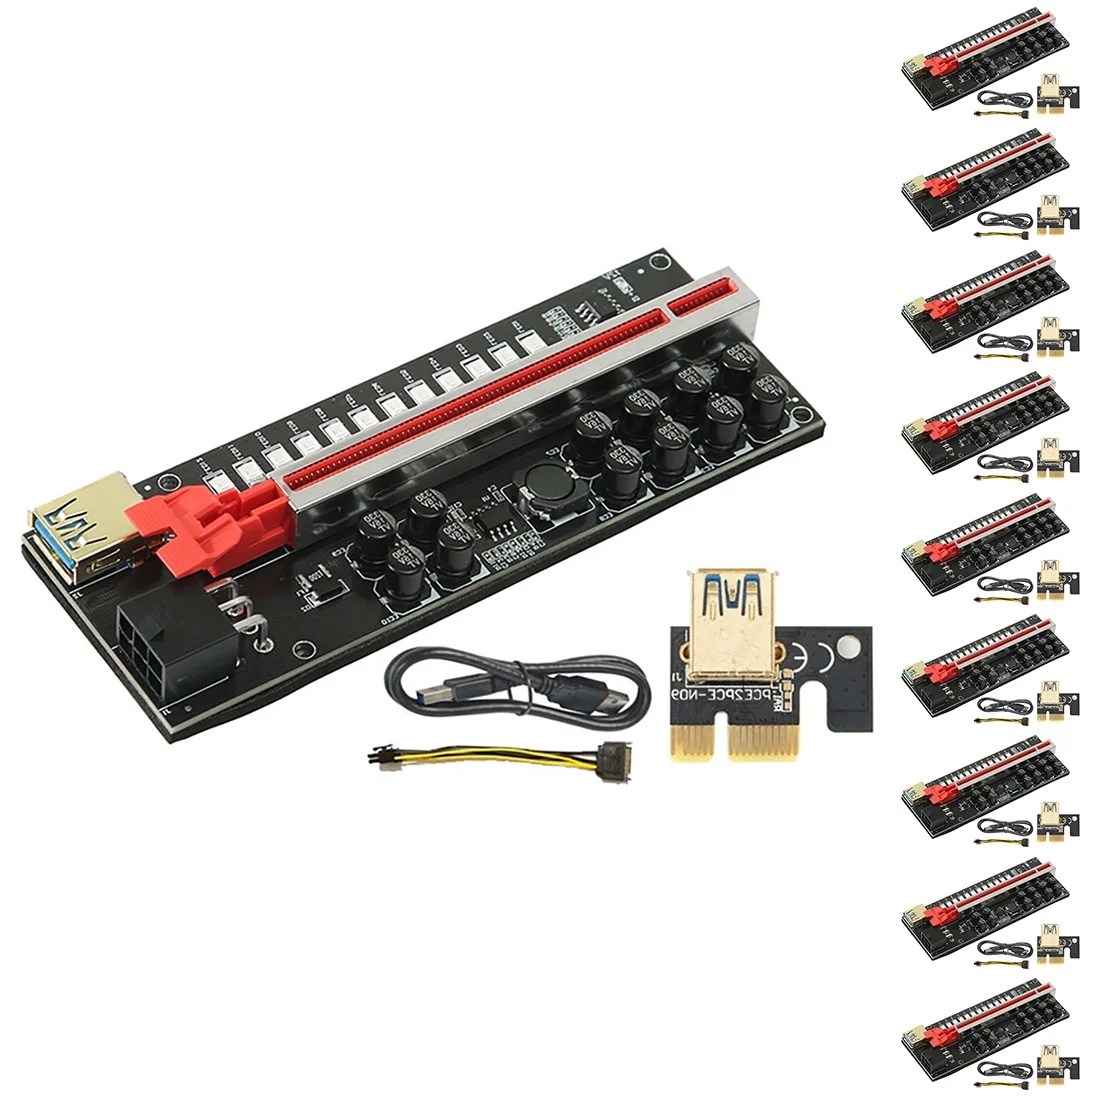 

10 Pcs VER018S Miner Card PCI-E 1X to 16X USB3.0 6PIN GPU Riser Card with 12 Capacitors and LED Lights for BTC Miner